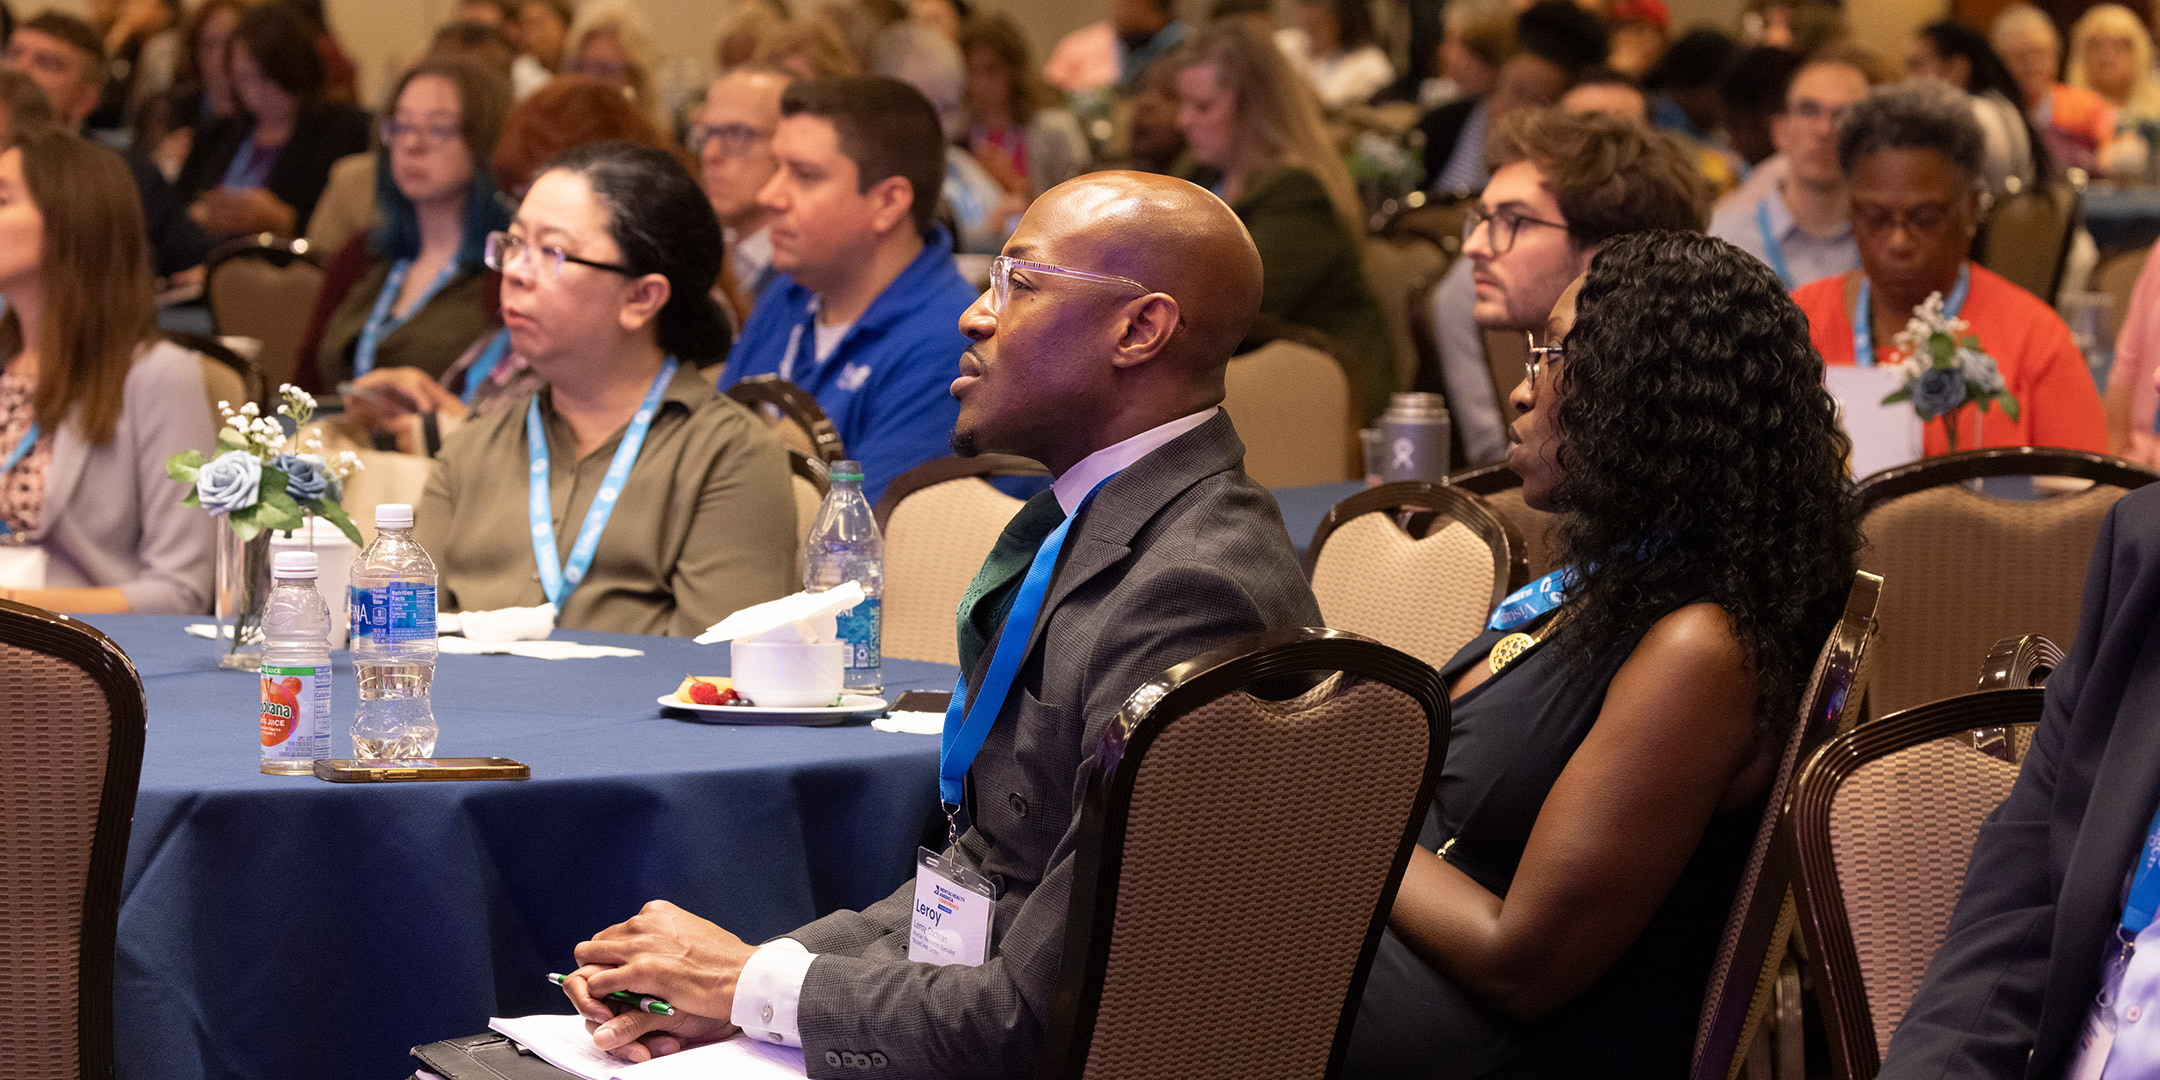 Attendees of the 2023 Mental Health America Conference listen attentively